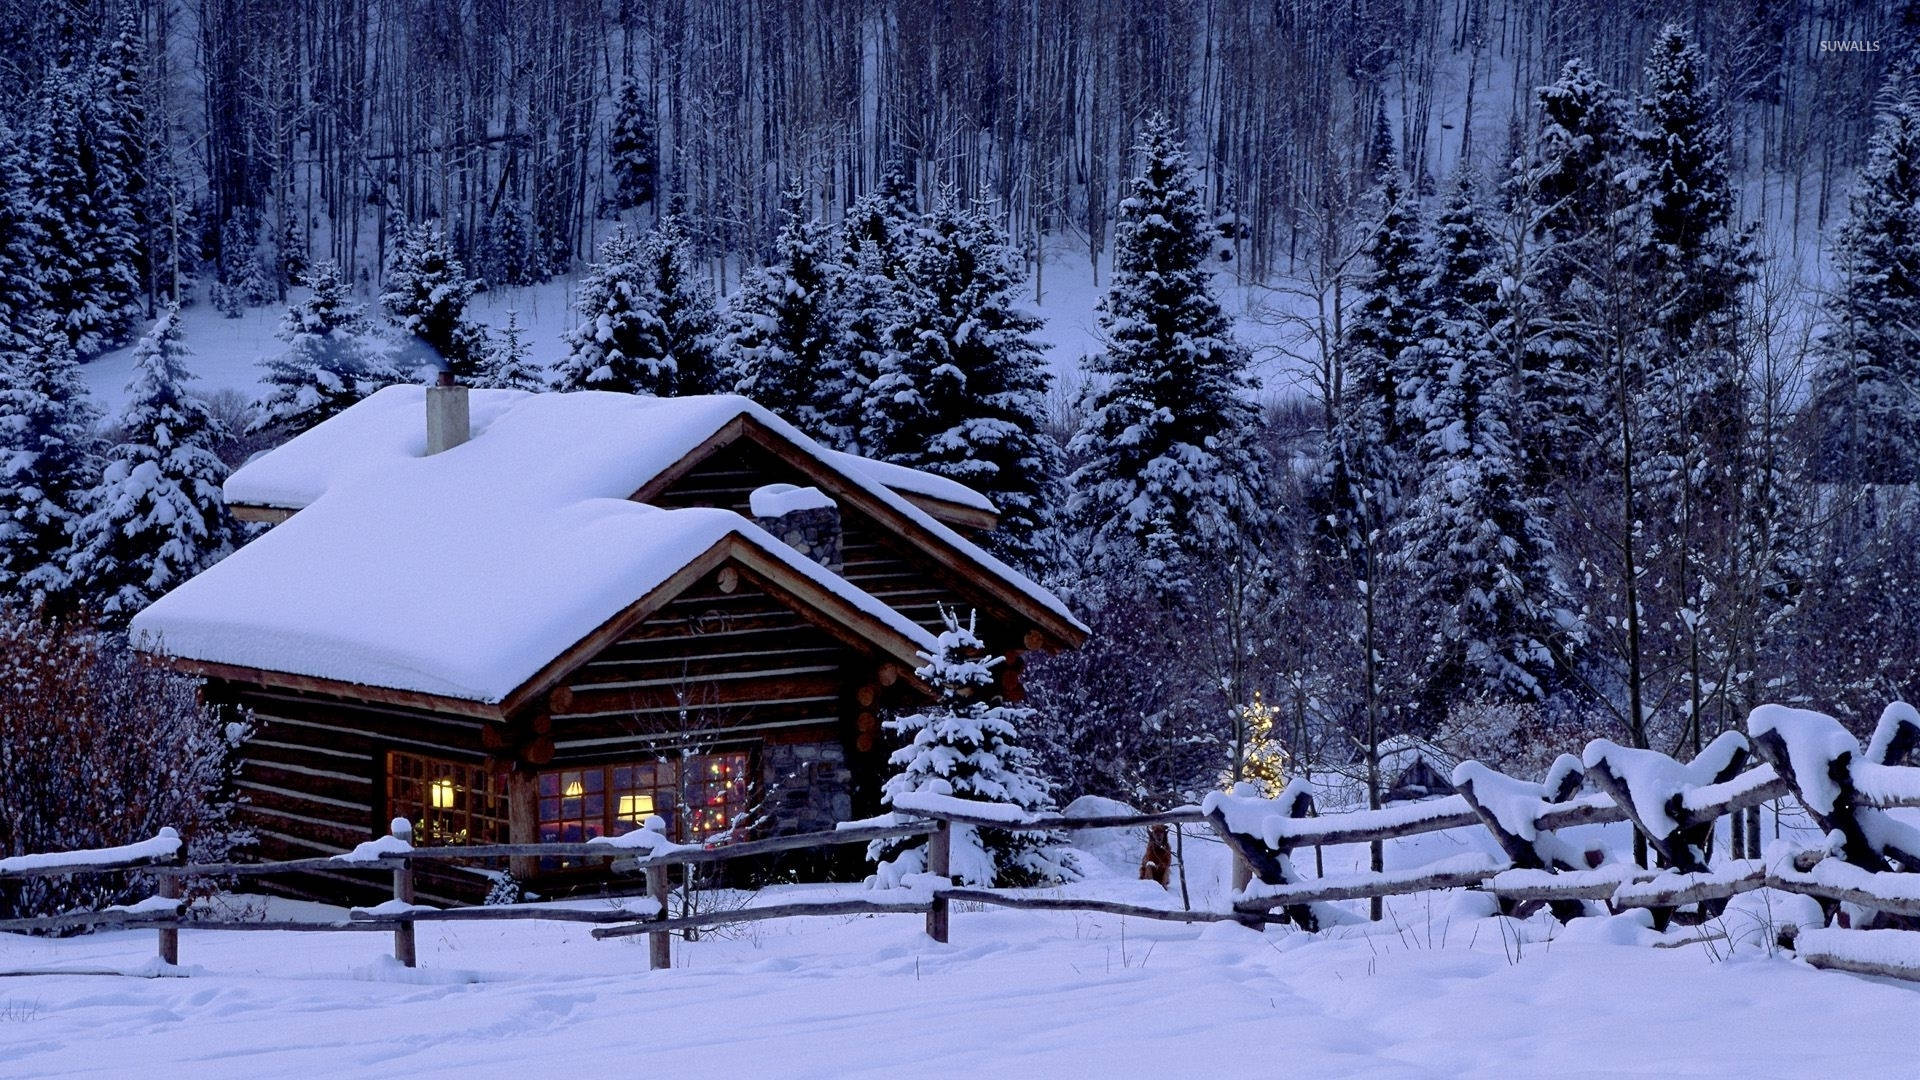 Cabin With Fences In Christmas Forest Wallpaper